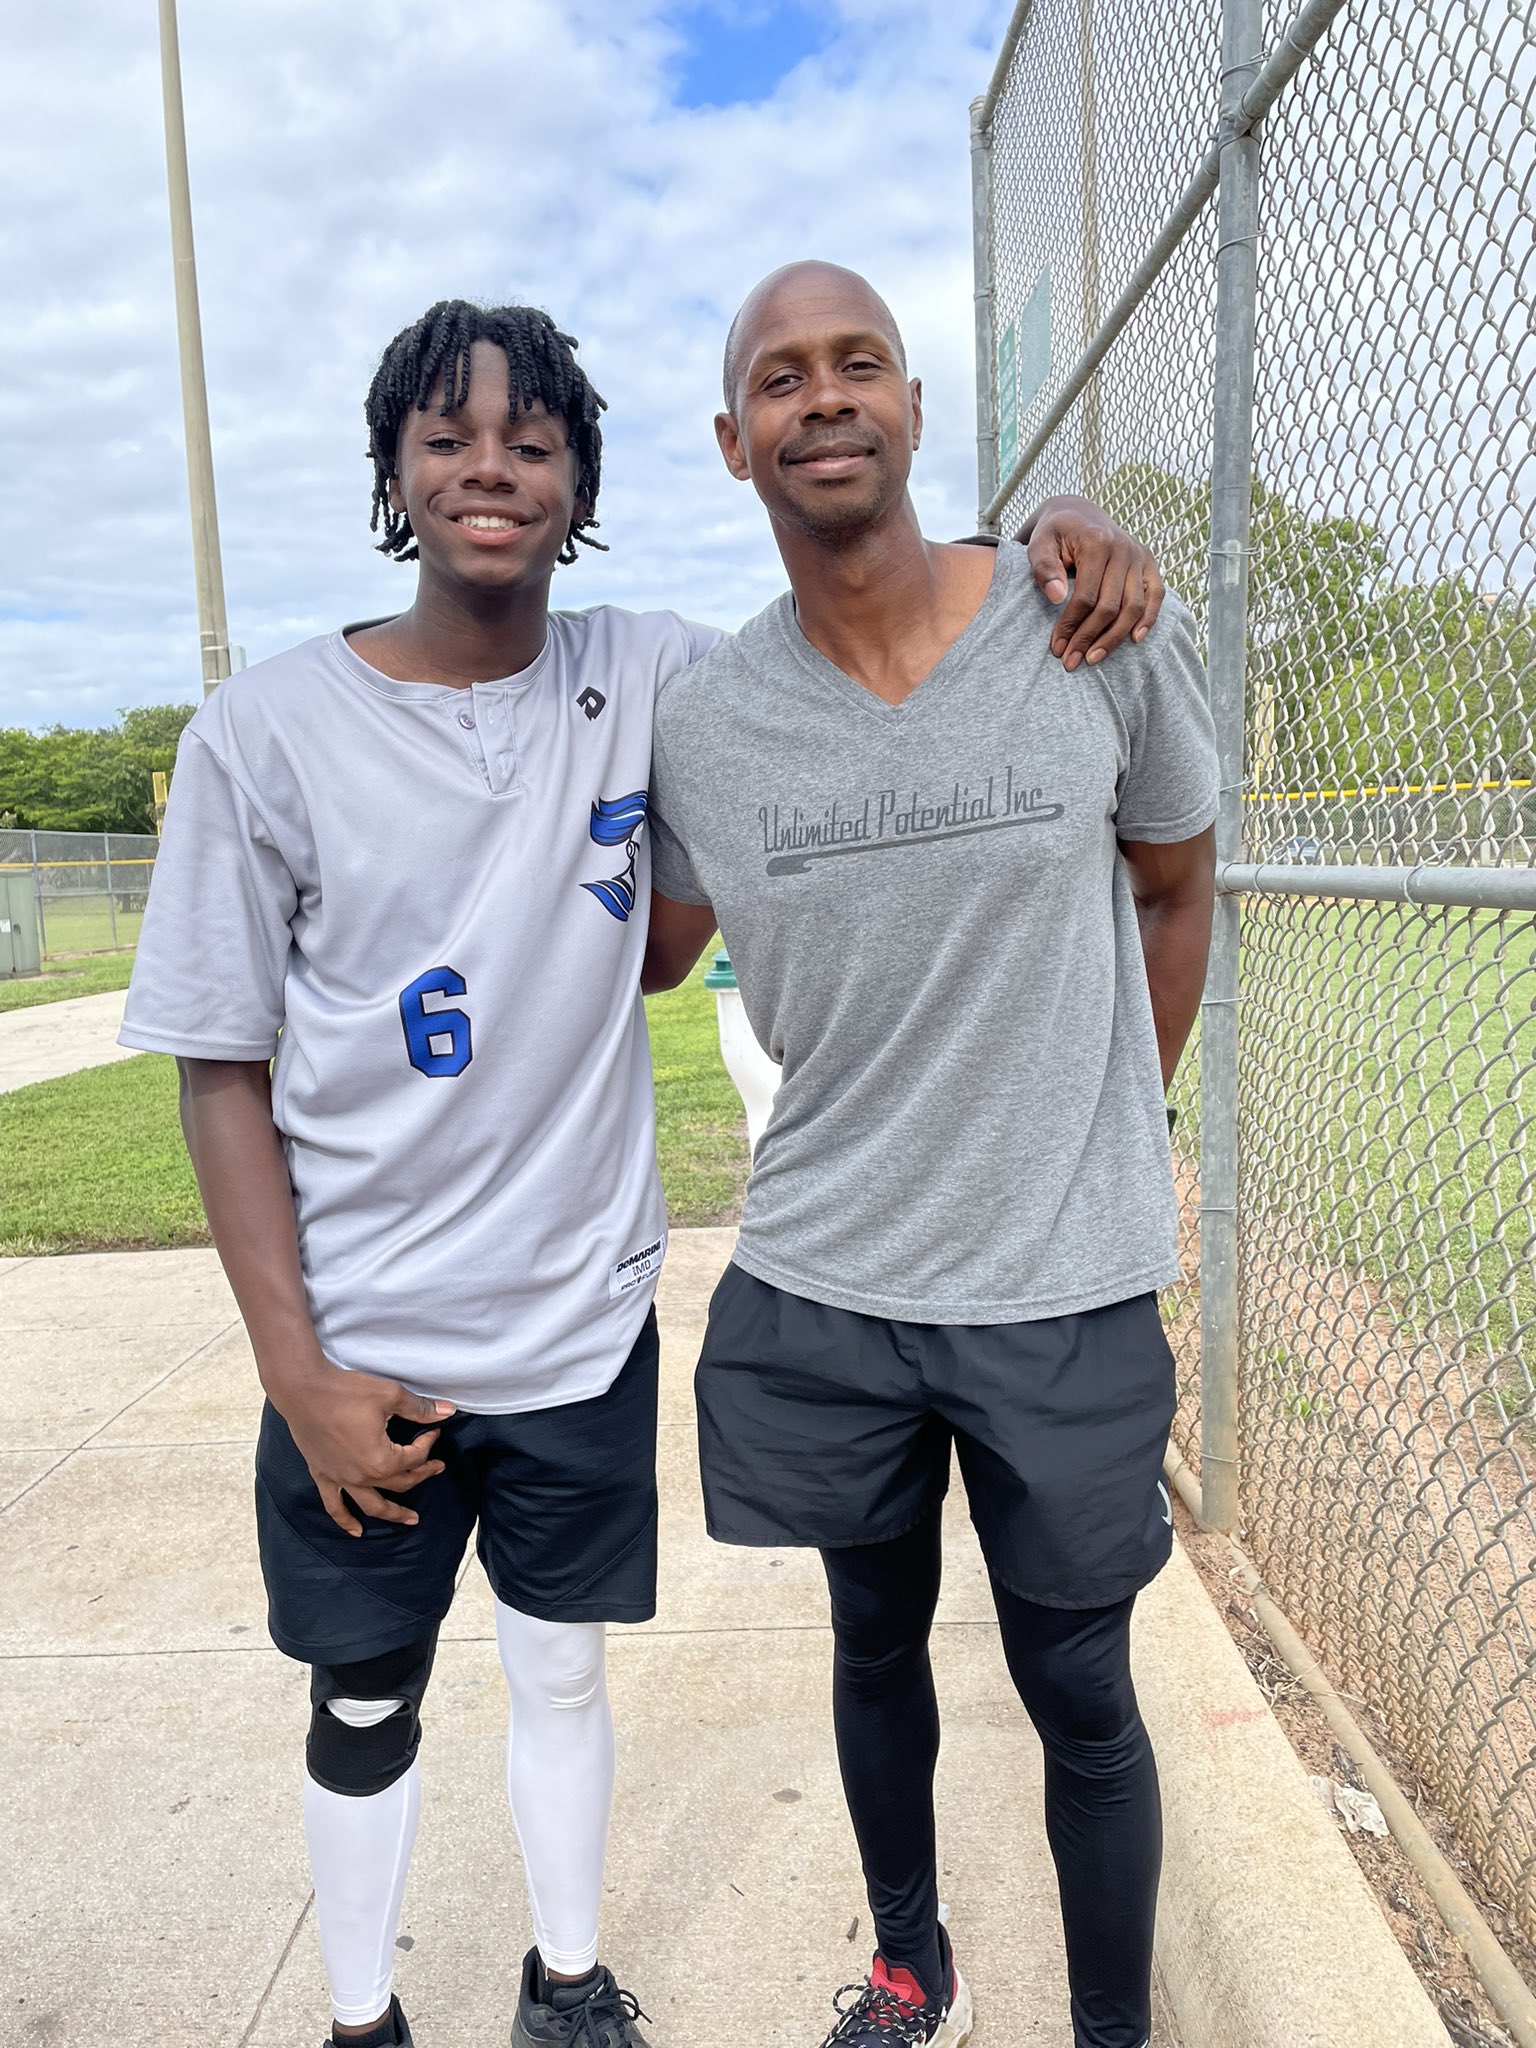 Juan Pierre on X: It was great seeing and catching up with you